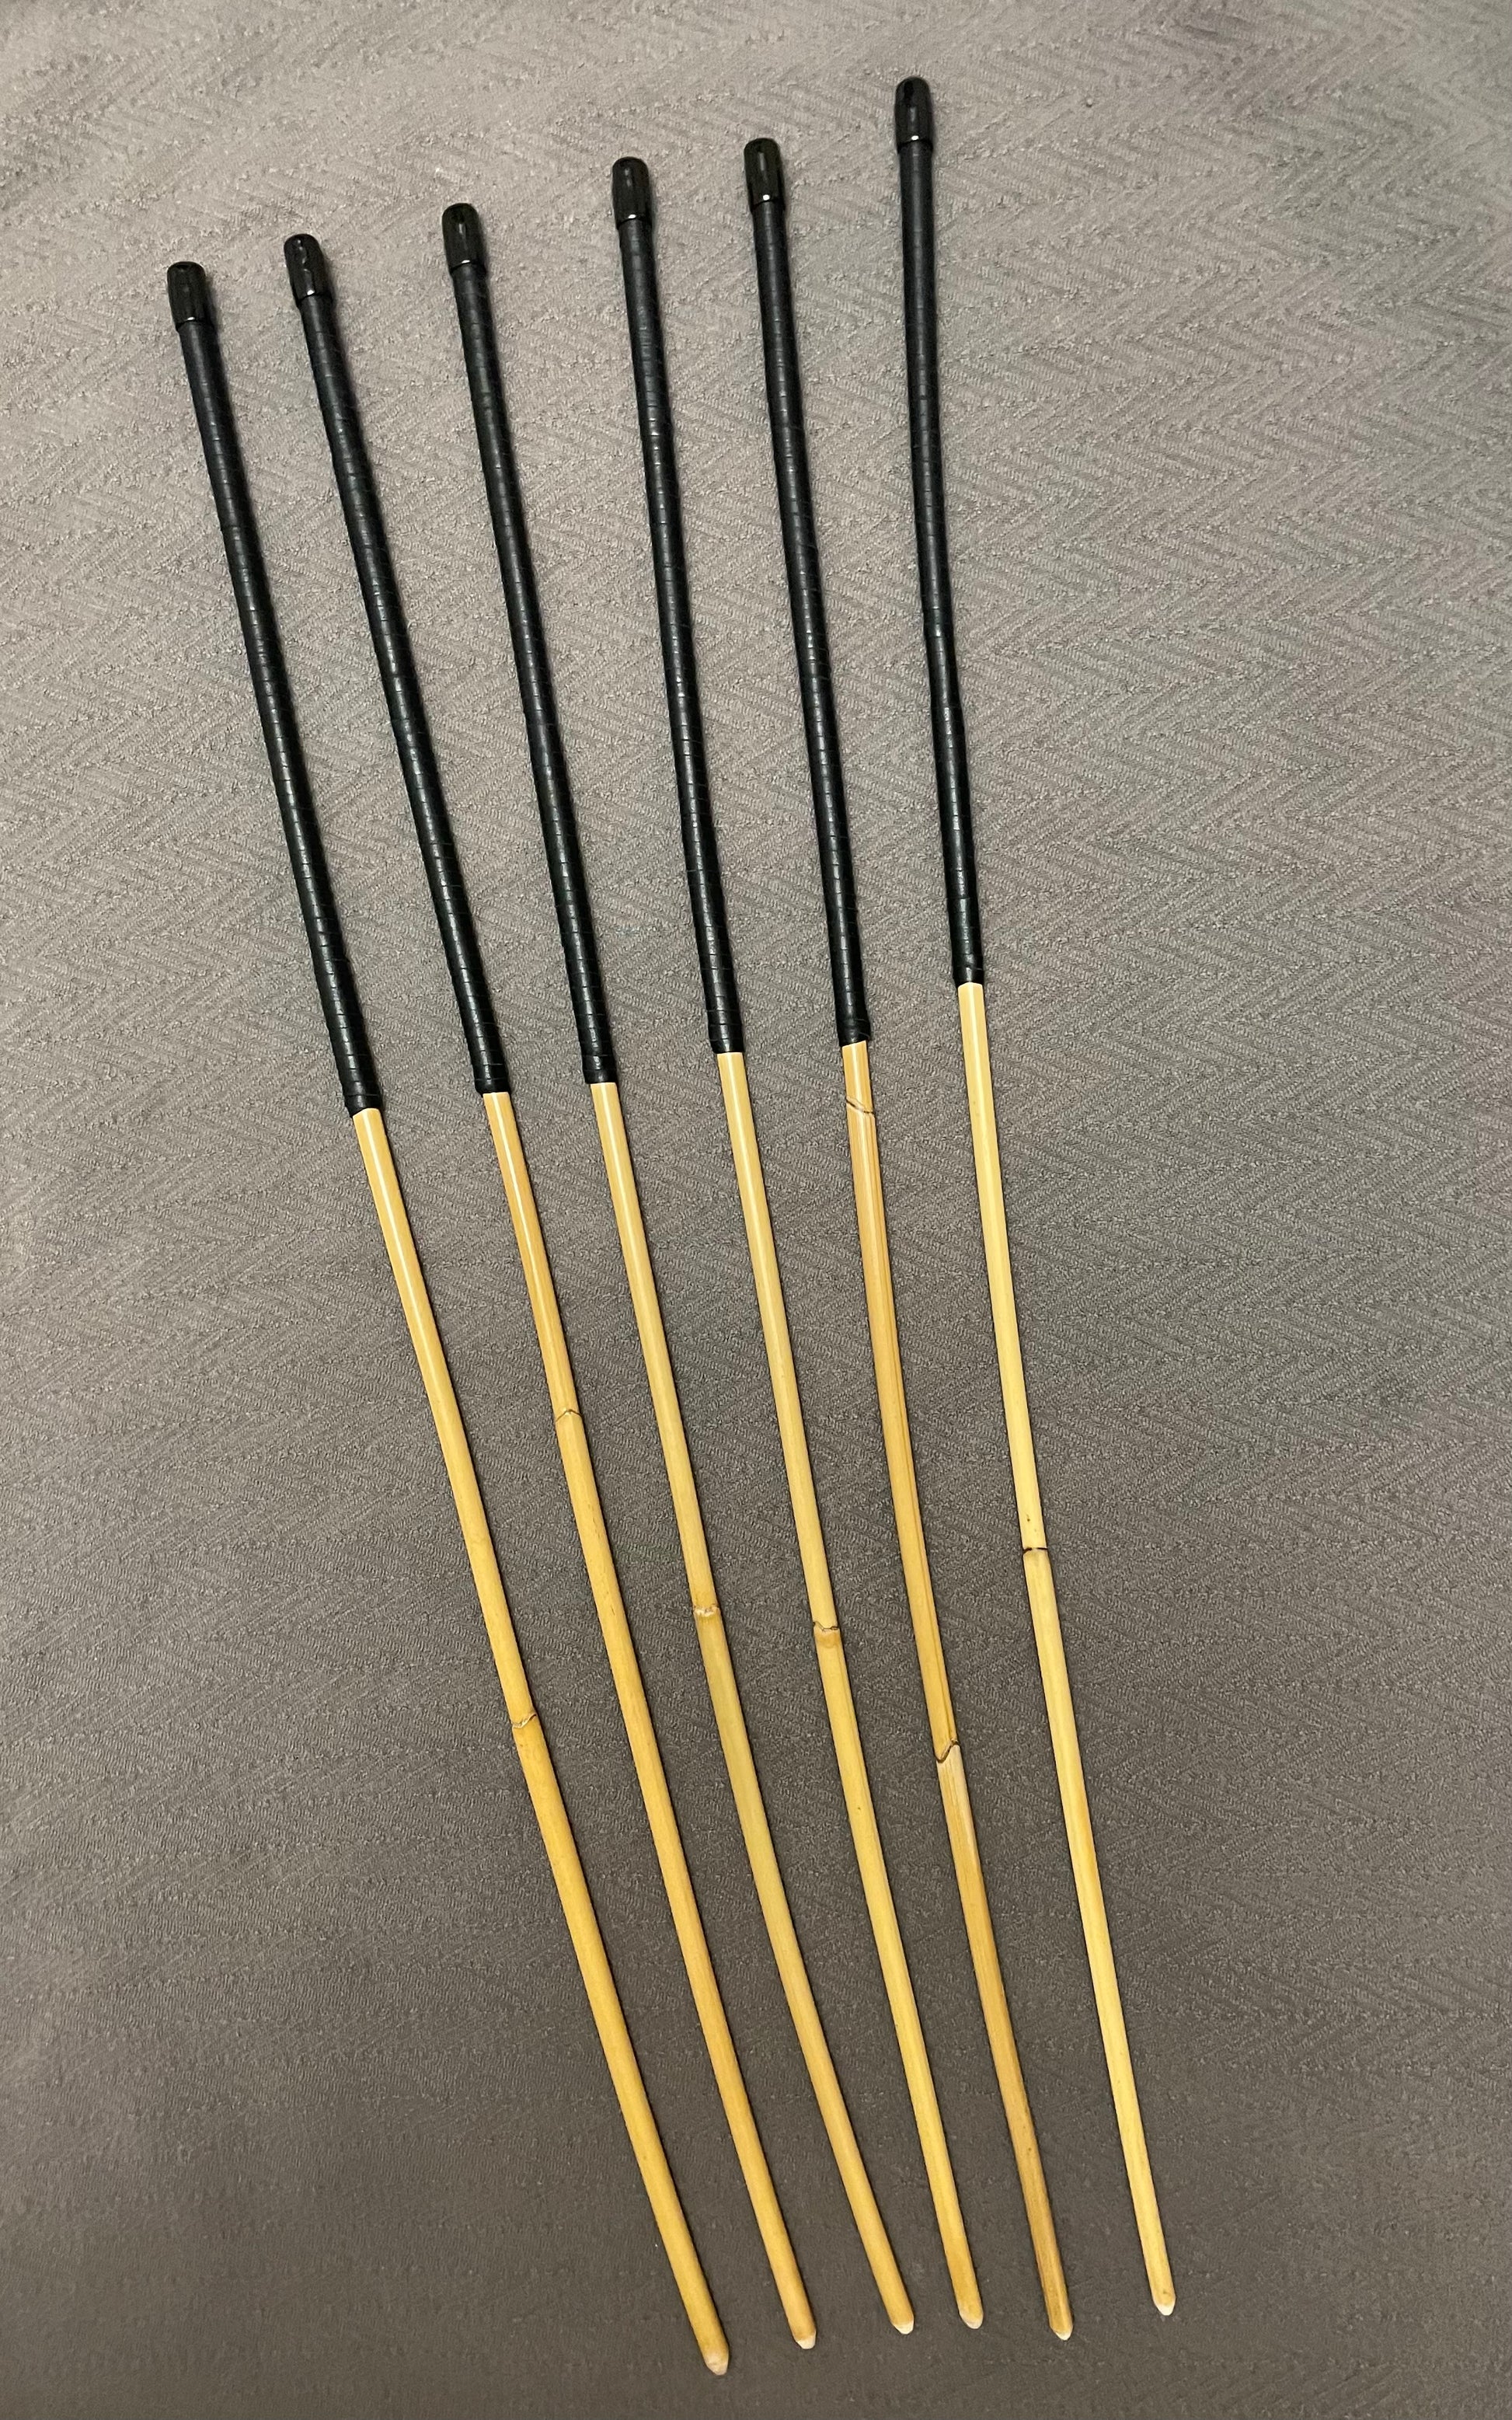 Thick and Thuddy ProDomme Dragon Cane Set of 6 Rattan Canes / Whipping Canes / BDSM Canes - 95 cms Length - Black Kangaroo Leather Handles